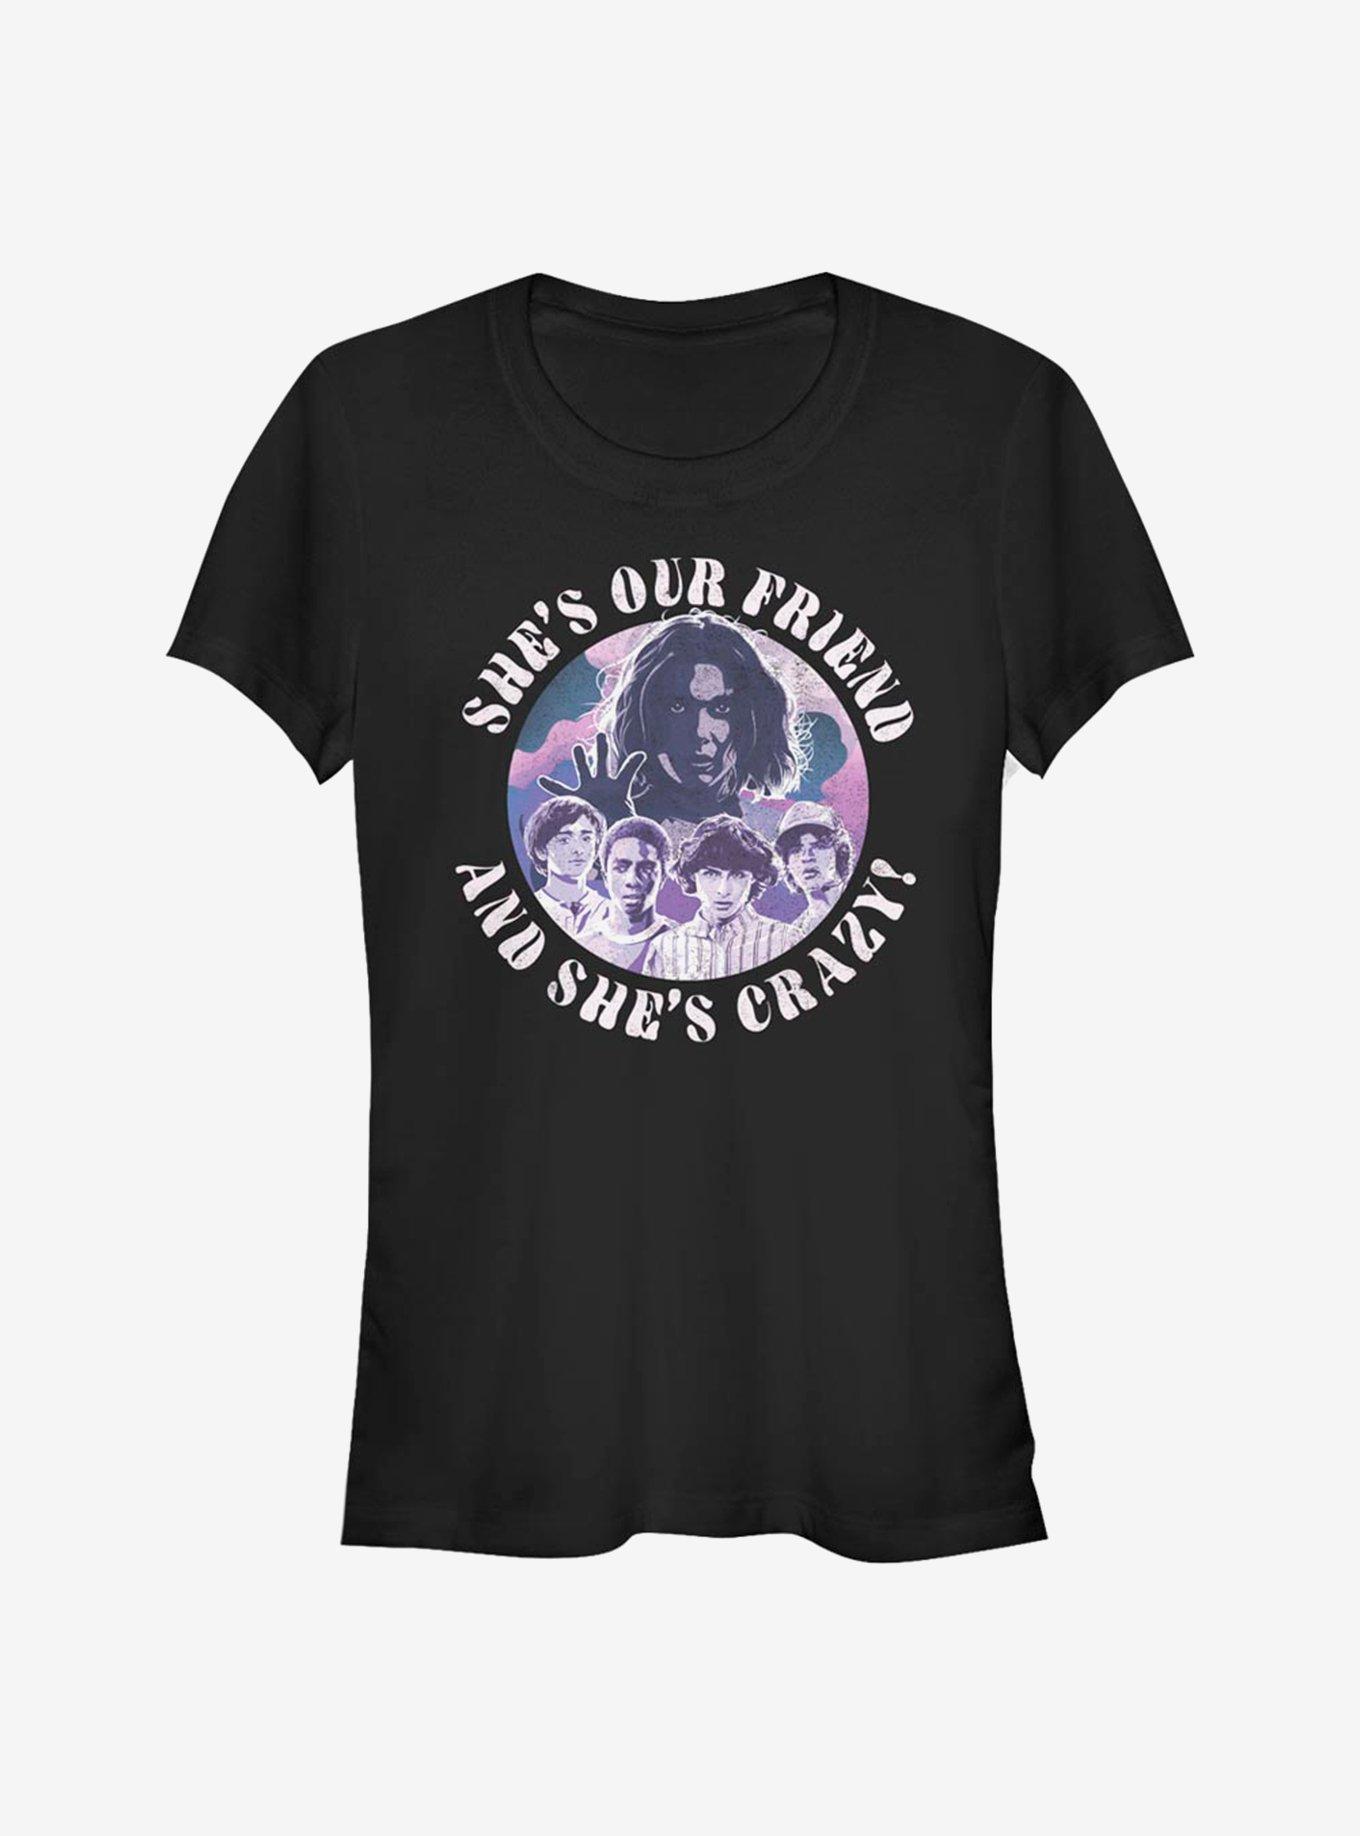 Stranger Things Our Friend Is Crazy Girls T-Shirt, BLACK, hi-res